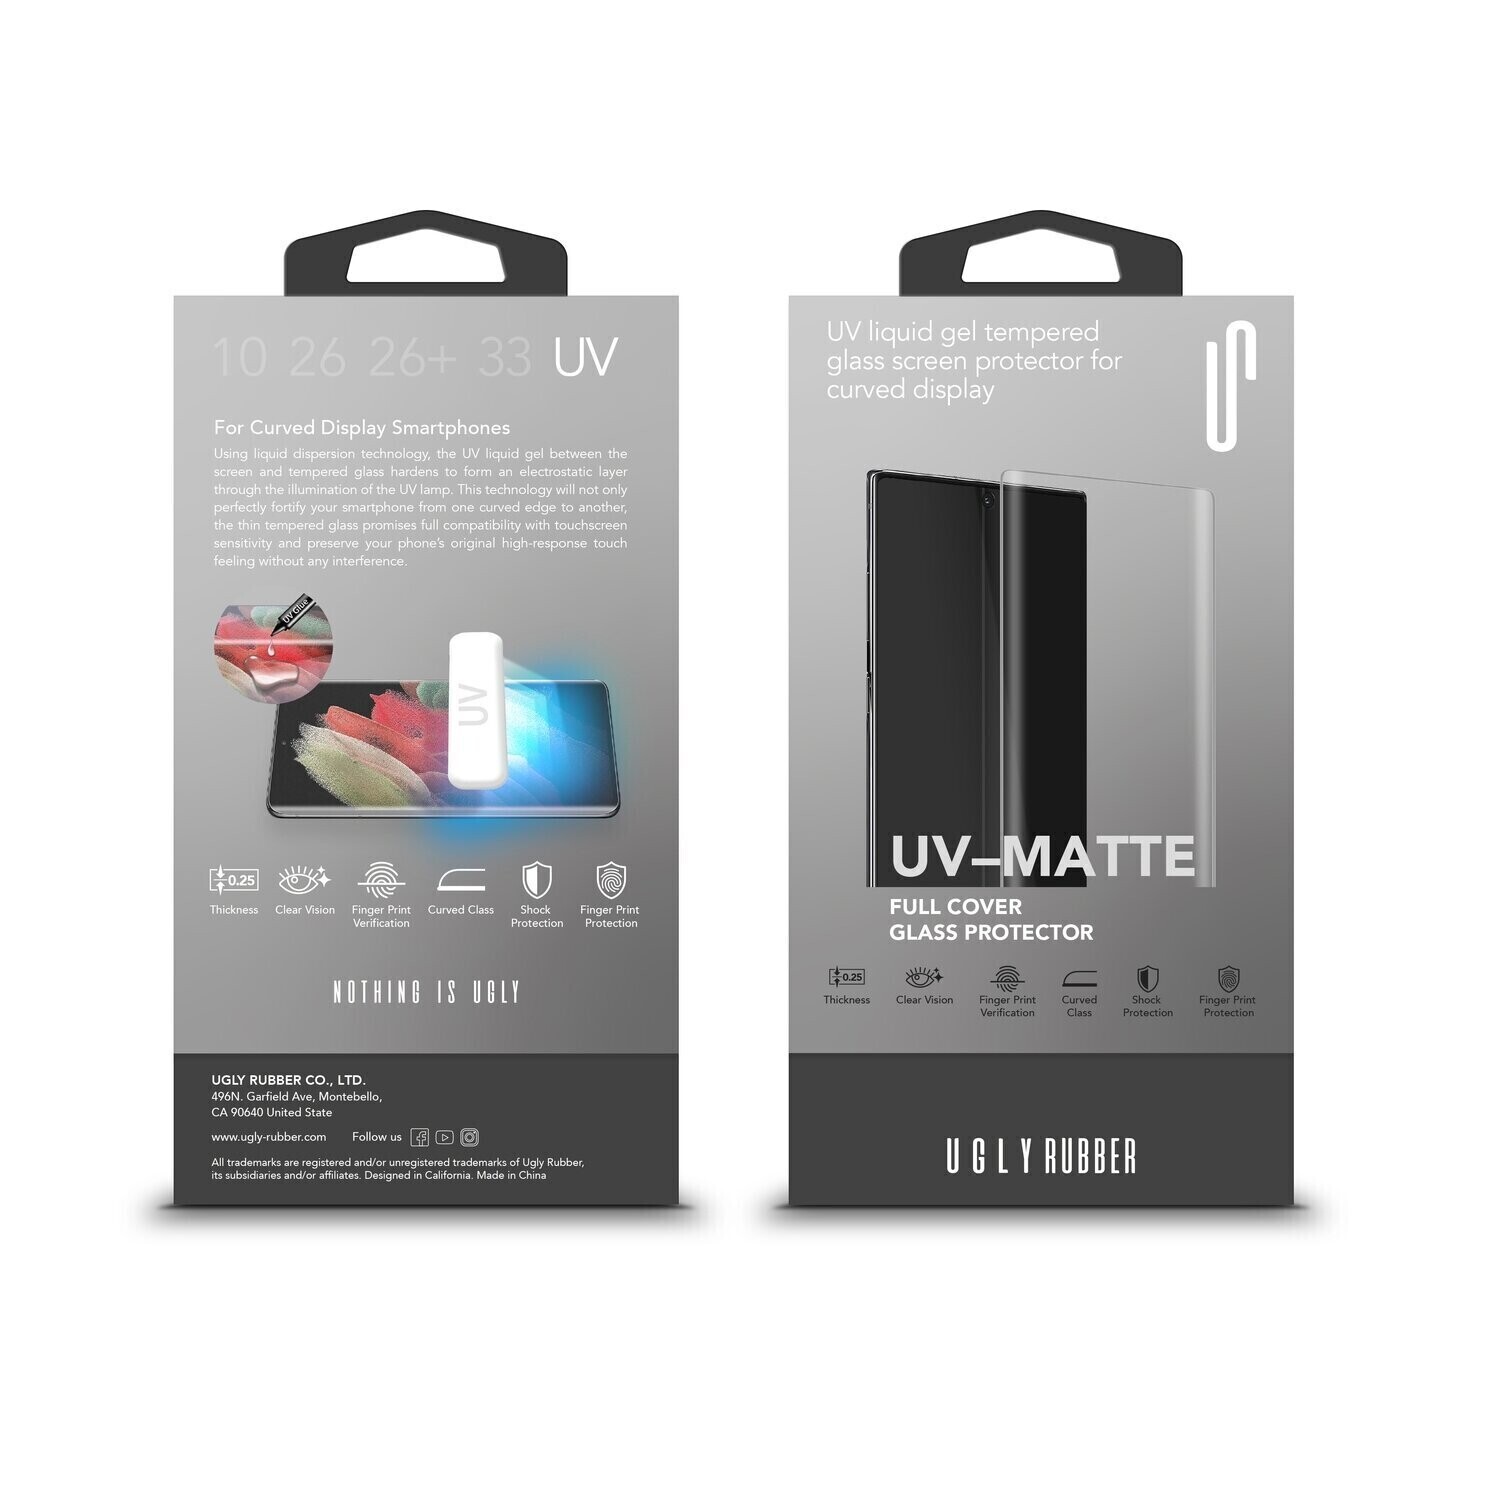 Ugly Rubber Huawei Mate 30 Pro UV Liquid Gel Tempered Glass, Matte